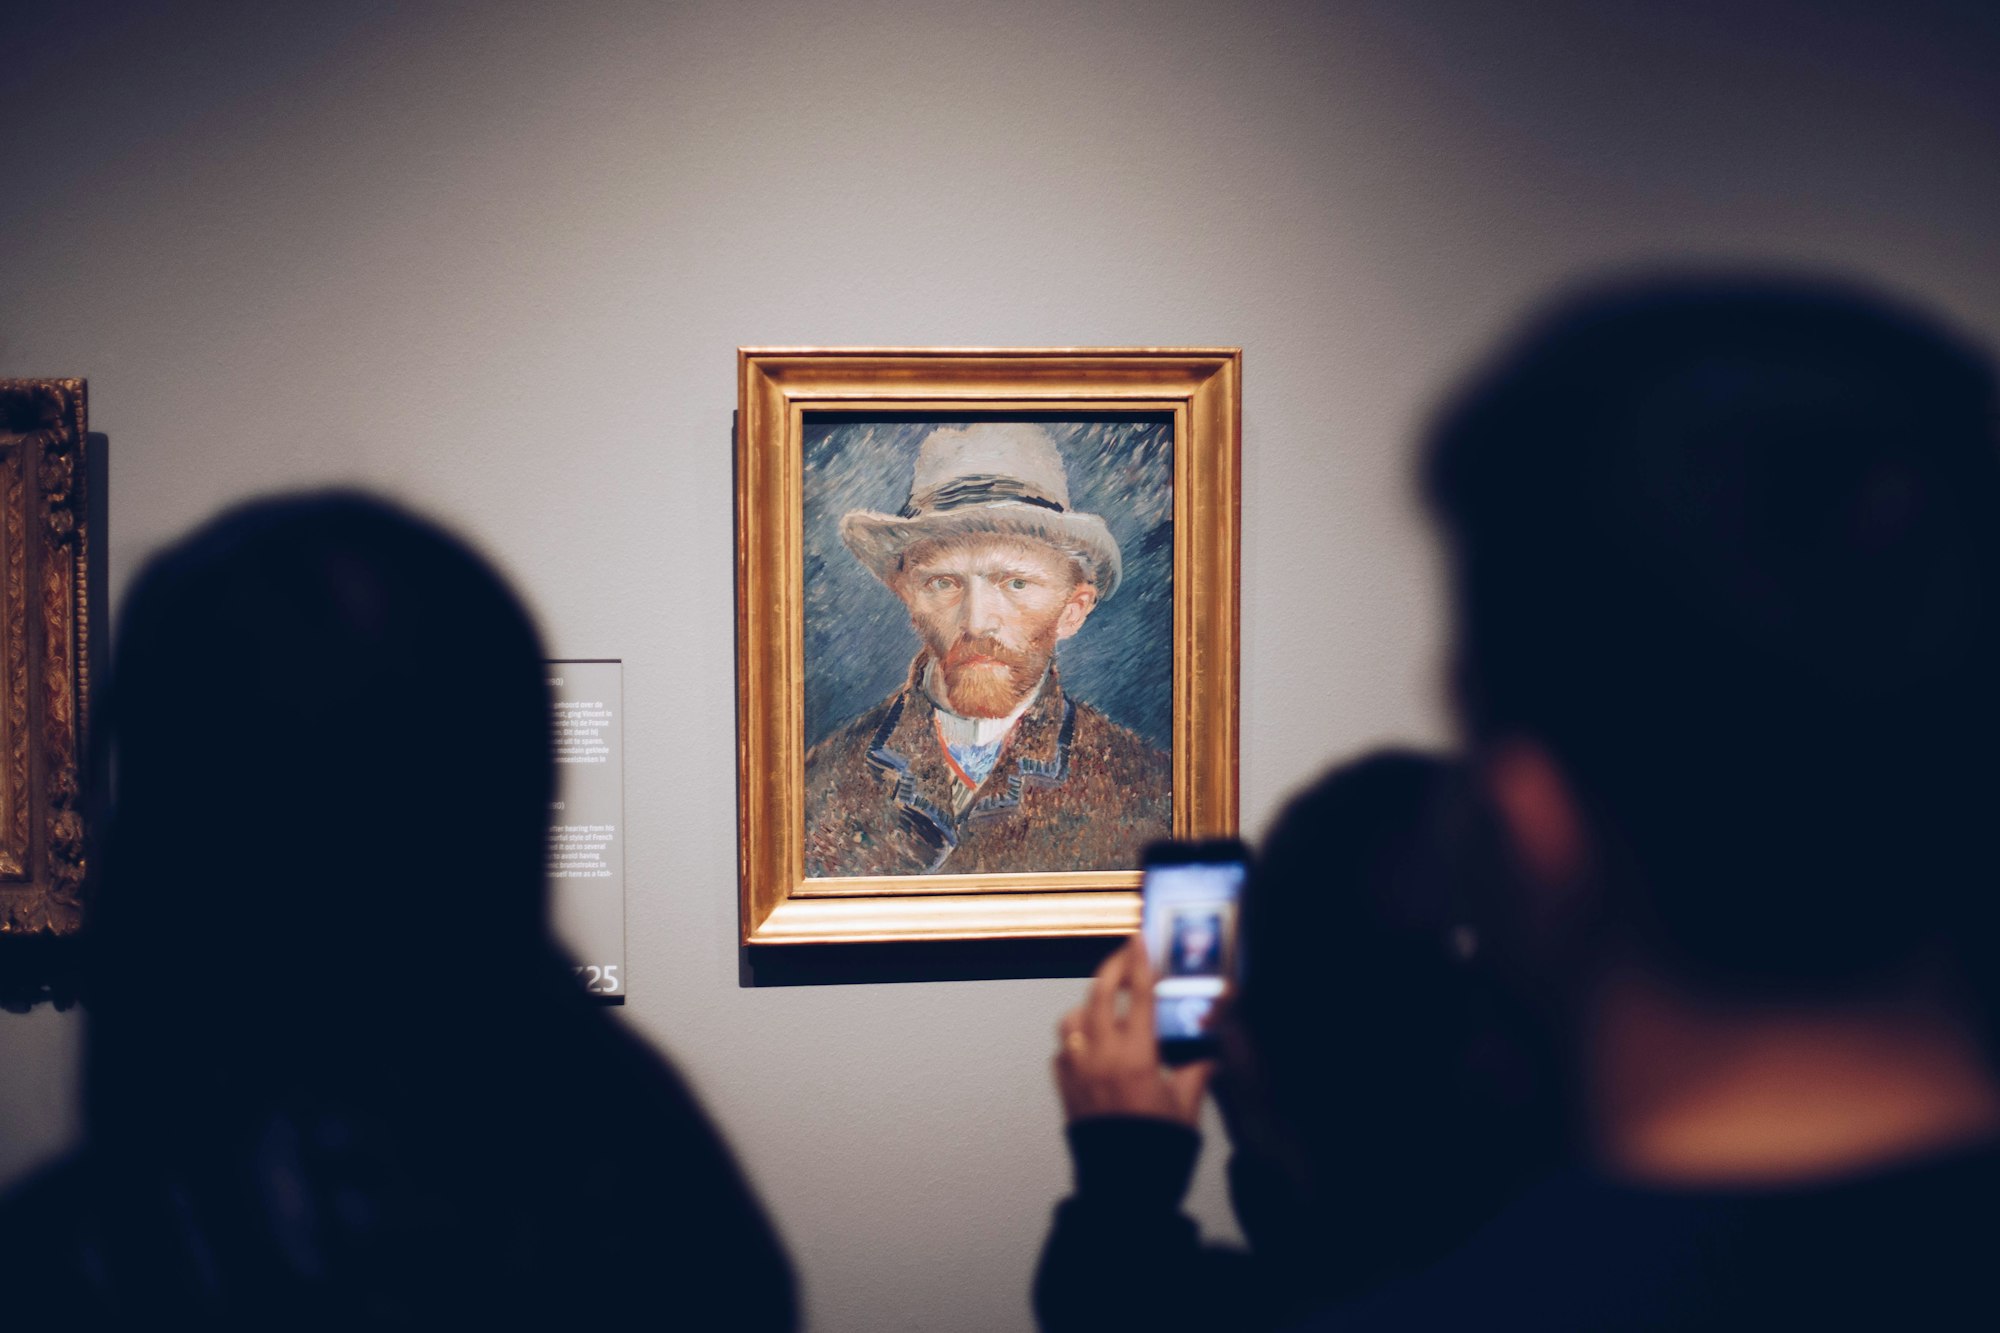 People passing by Vincent van Gogh’s self portrait and snapping a photo. More info at the Rijksmuseum’s website: https://www.rijksmuseum.nl/en/collection/SK-A-3262